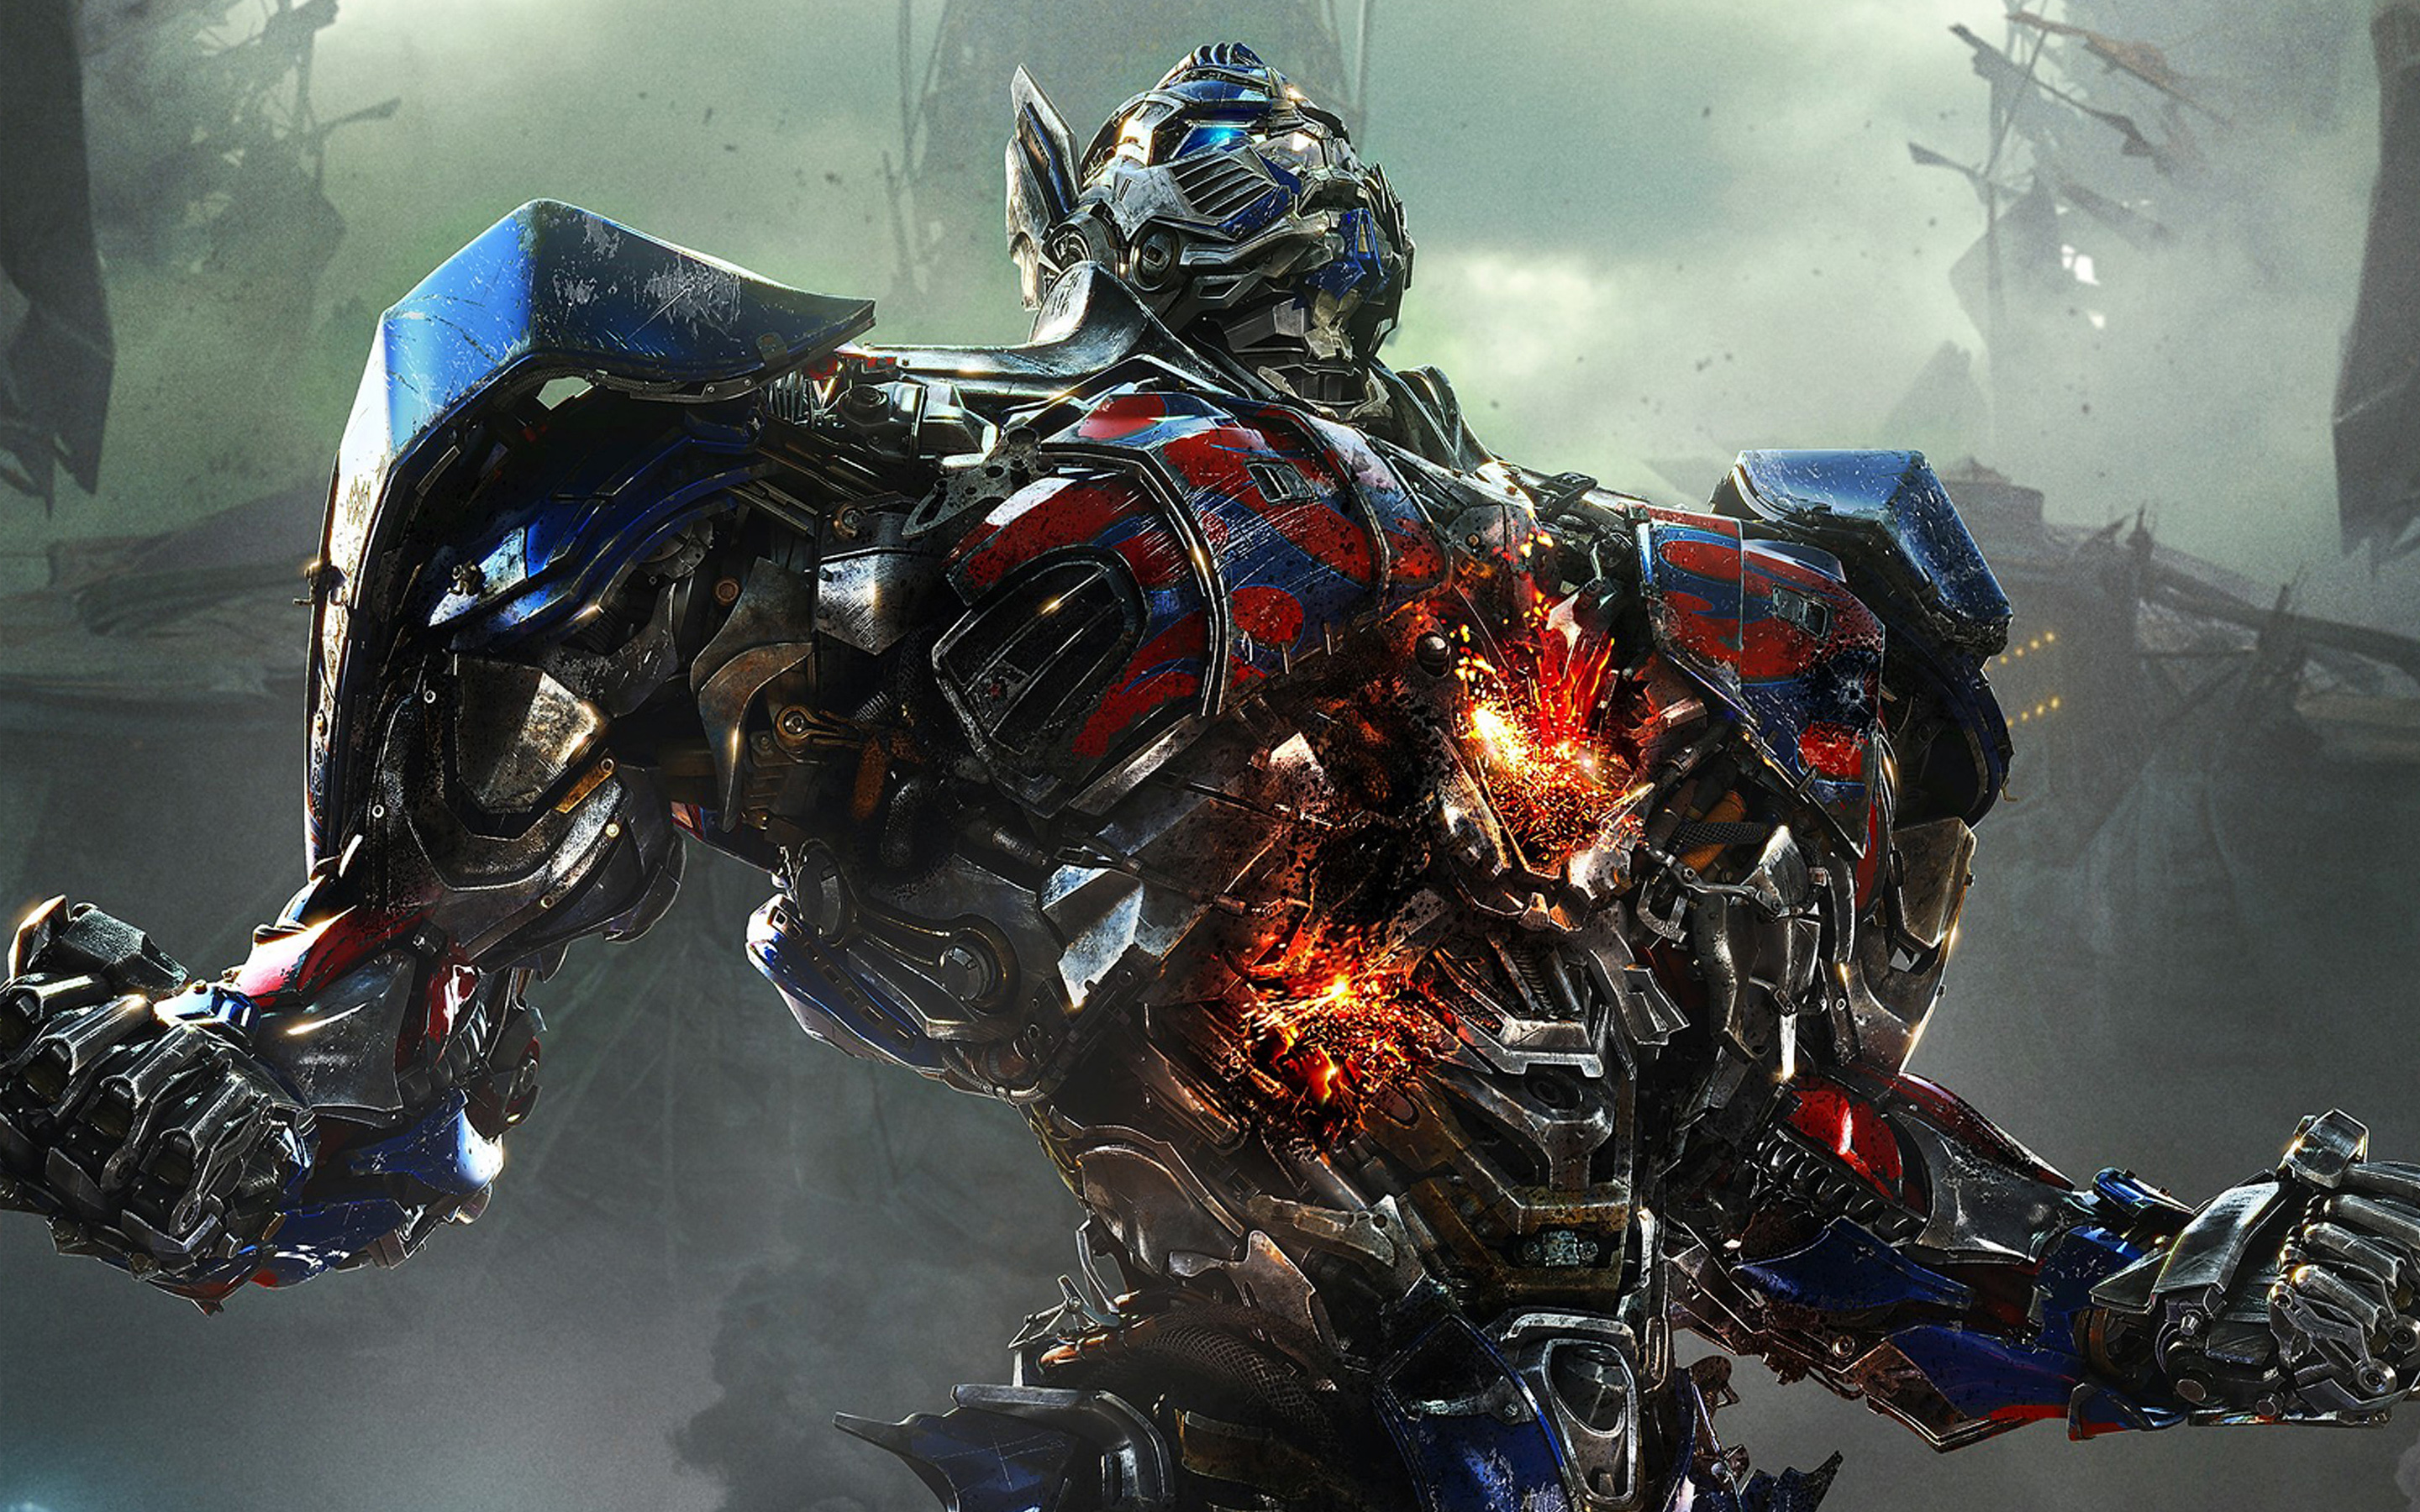 Podcast: Blake’s thoughts on Transformers: Age of Extinction – Episode 72 Bonus Content